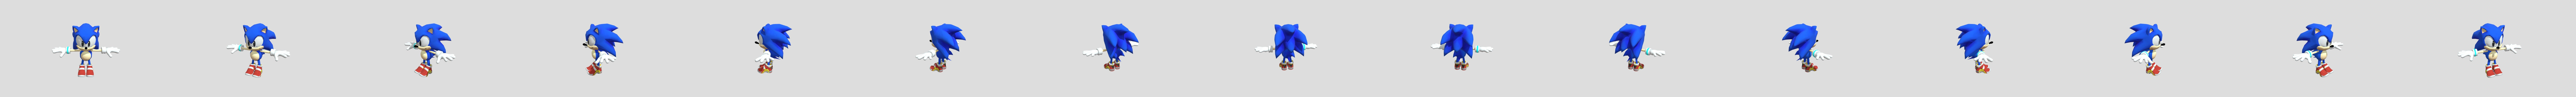 Sonic Adventure - Classic Sonic - Download Free 3D model by  Classic_Sonic_Lover (@Classic_Sonic_Lover) [233b271]